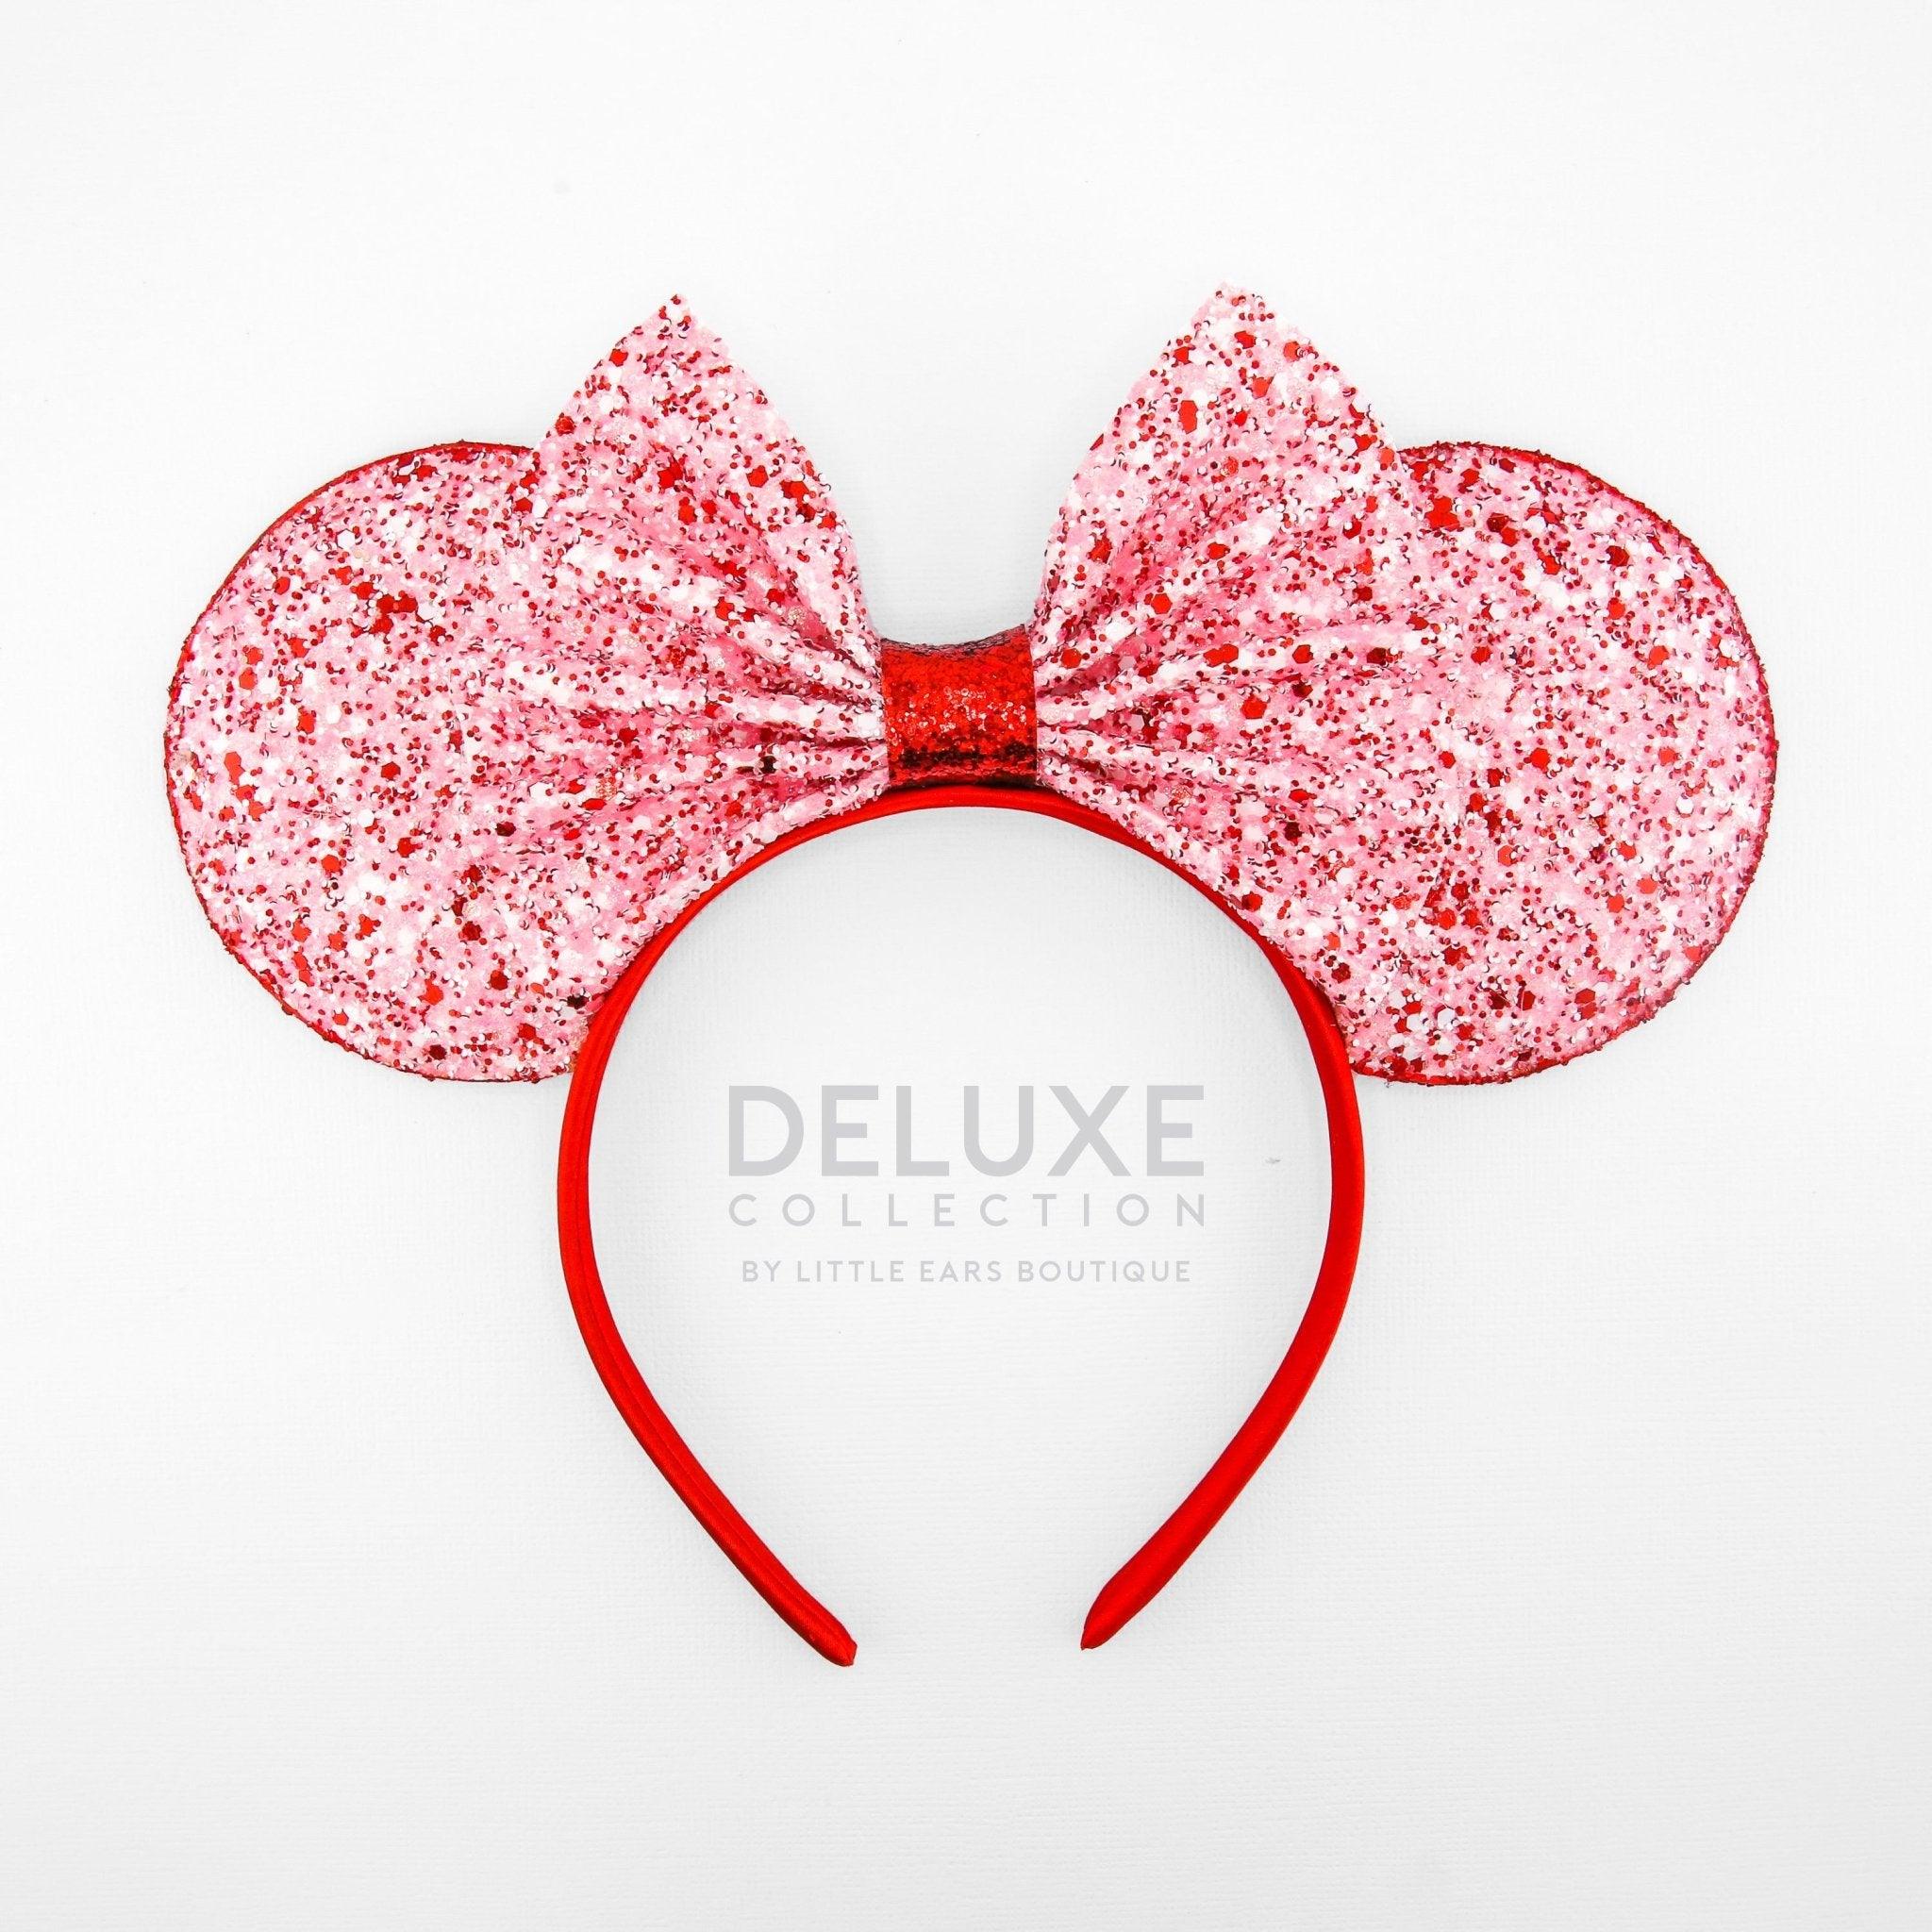  Seamoy Sequin Stitch Minnie Ears Headband, Pink Stitch Ears,  Park ears Princess, Sparkle Rose Gold Classic Red Mickey Ears Mouse Ears  Headband for Women Girls (Lilo & Stitch Pink) : Clothing